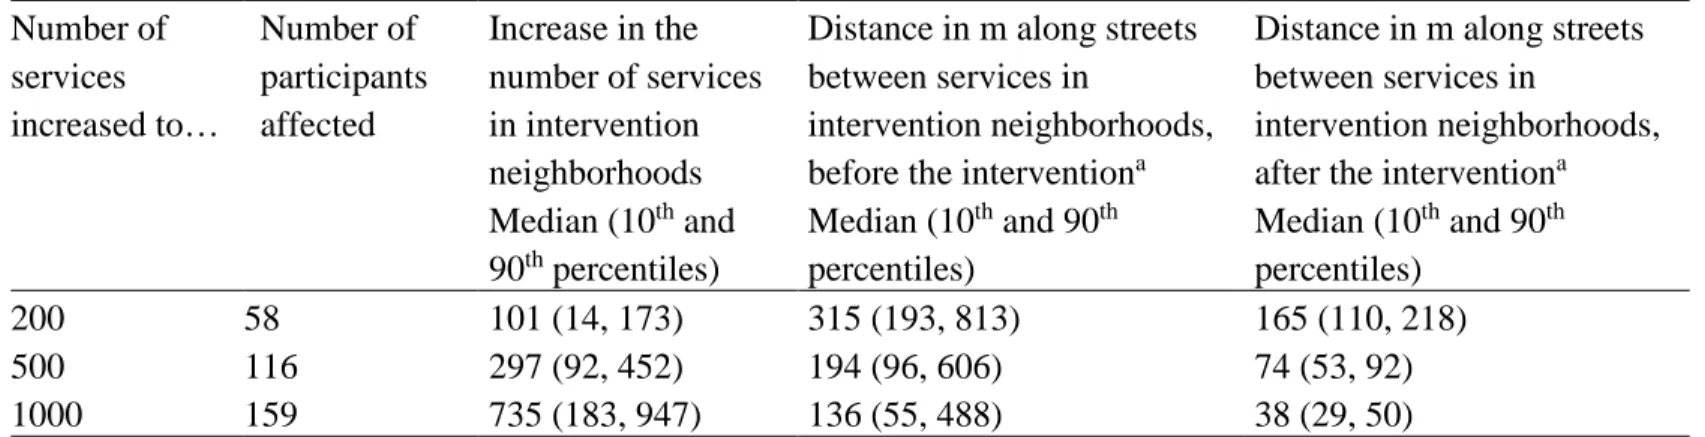 Table 1. Description of the hypothetical scenarios of intervention on the number of services in the residential  neighborhood Number of  services  increased to…  Number of  participants affected  Increase in the  number of services in intervention  neighbo